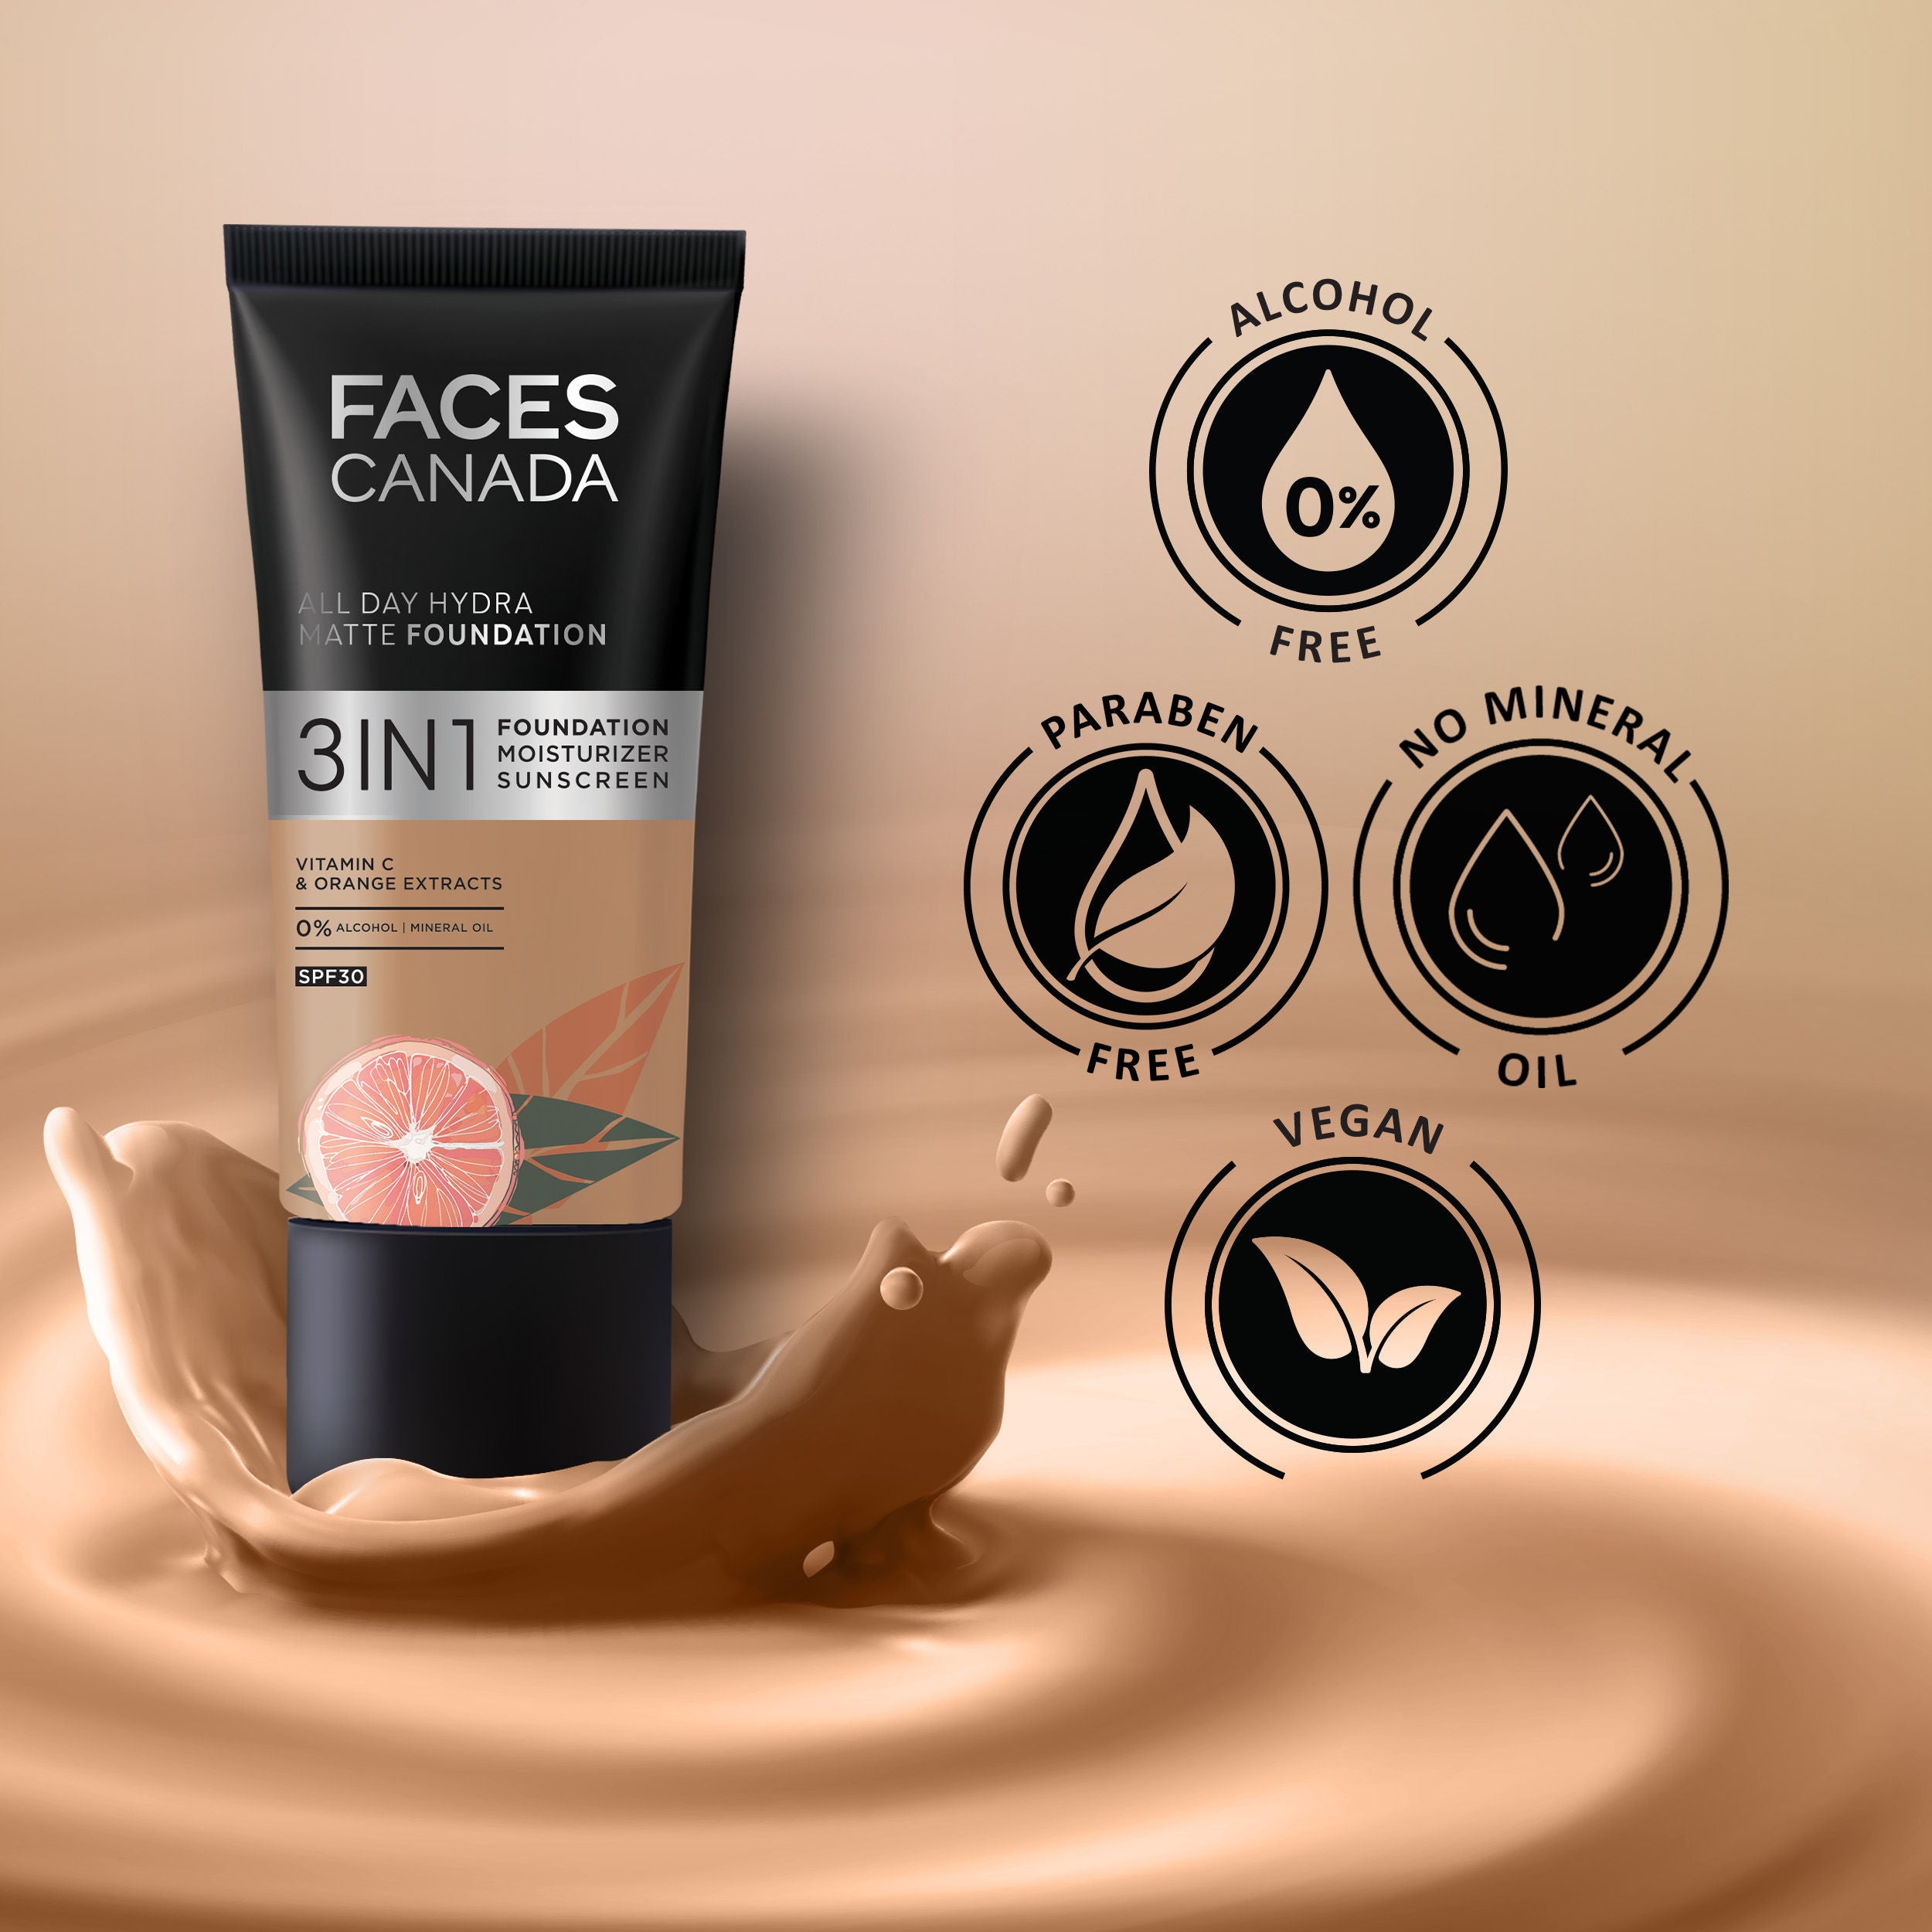 Faces Canada 3 In 1 All Day Hydra Matte Foundation - Honey Beige 031 (25ml) Faces Canada